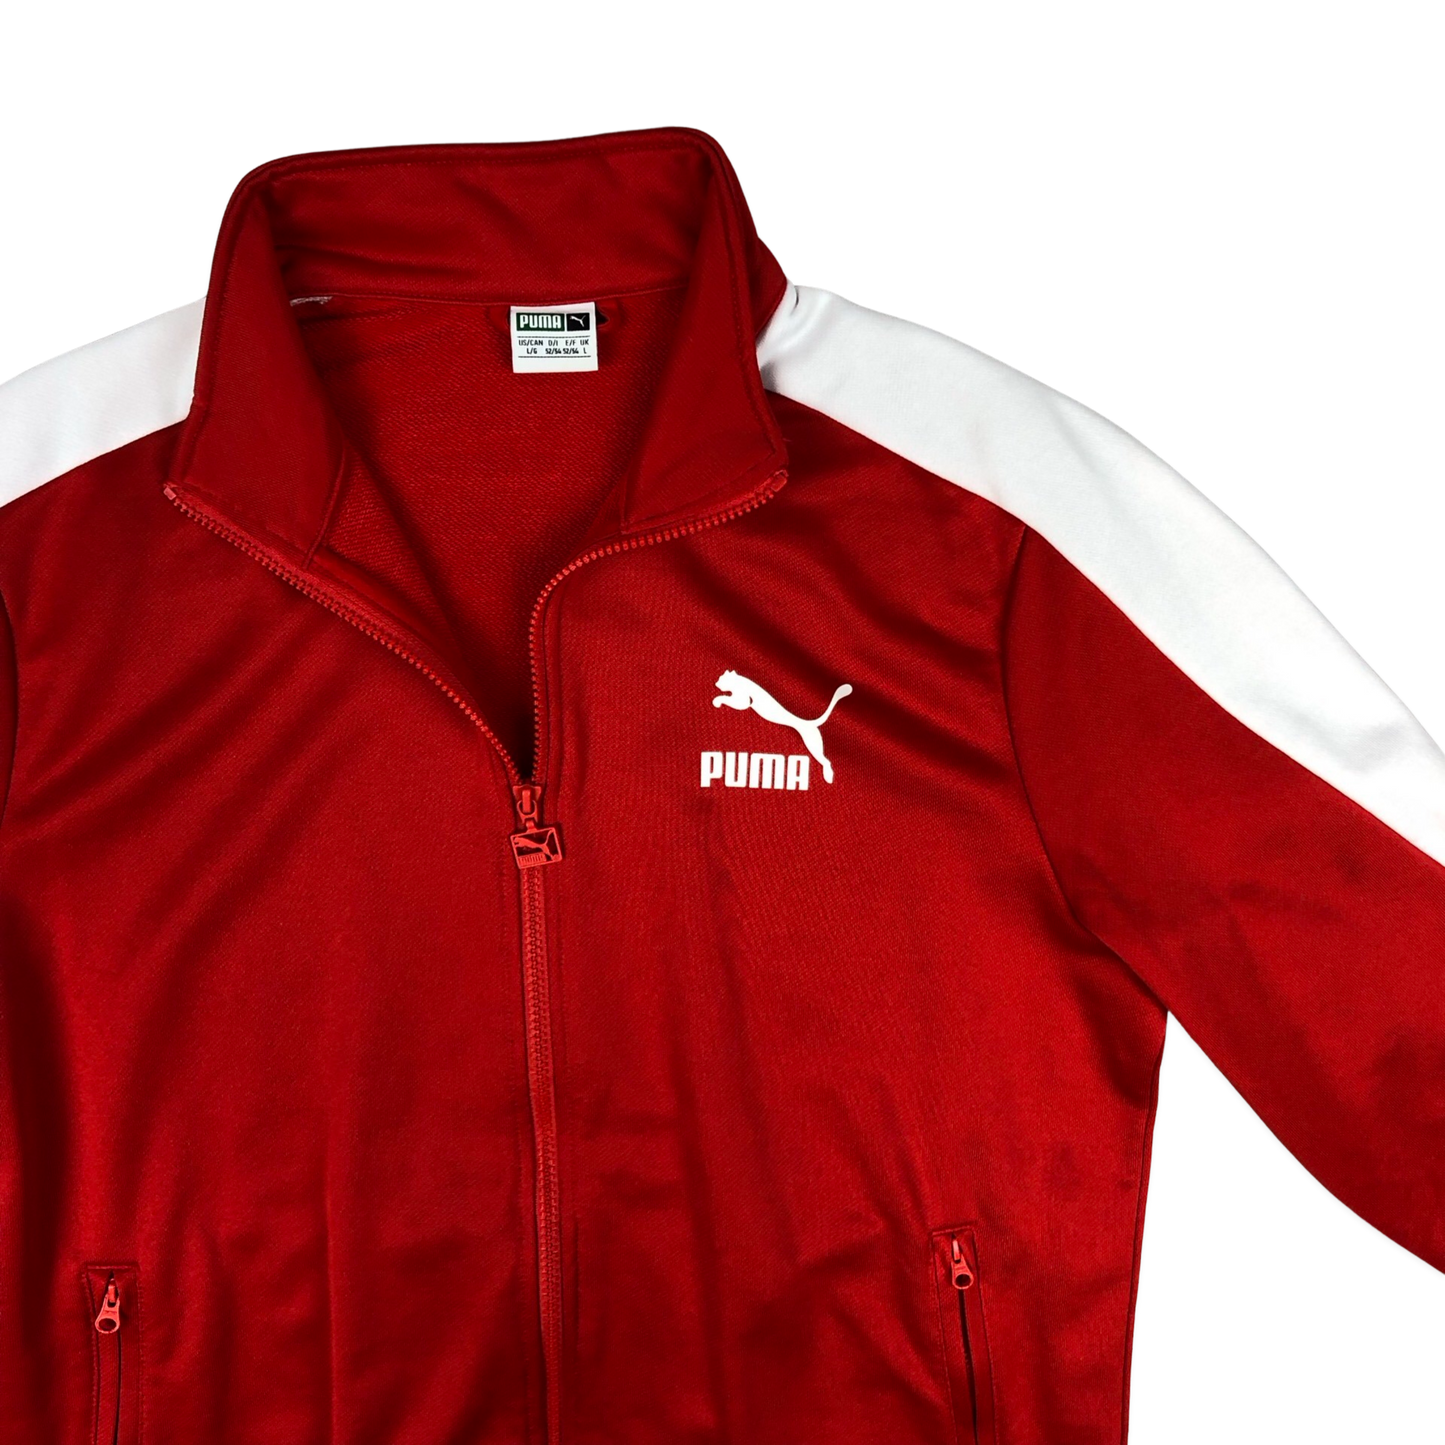 Vintage 90s 00s Puma Red and White Track Jacket XL